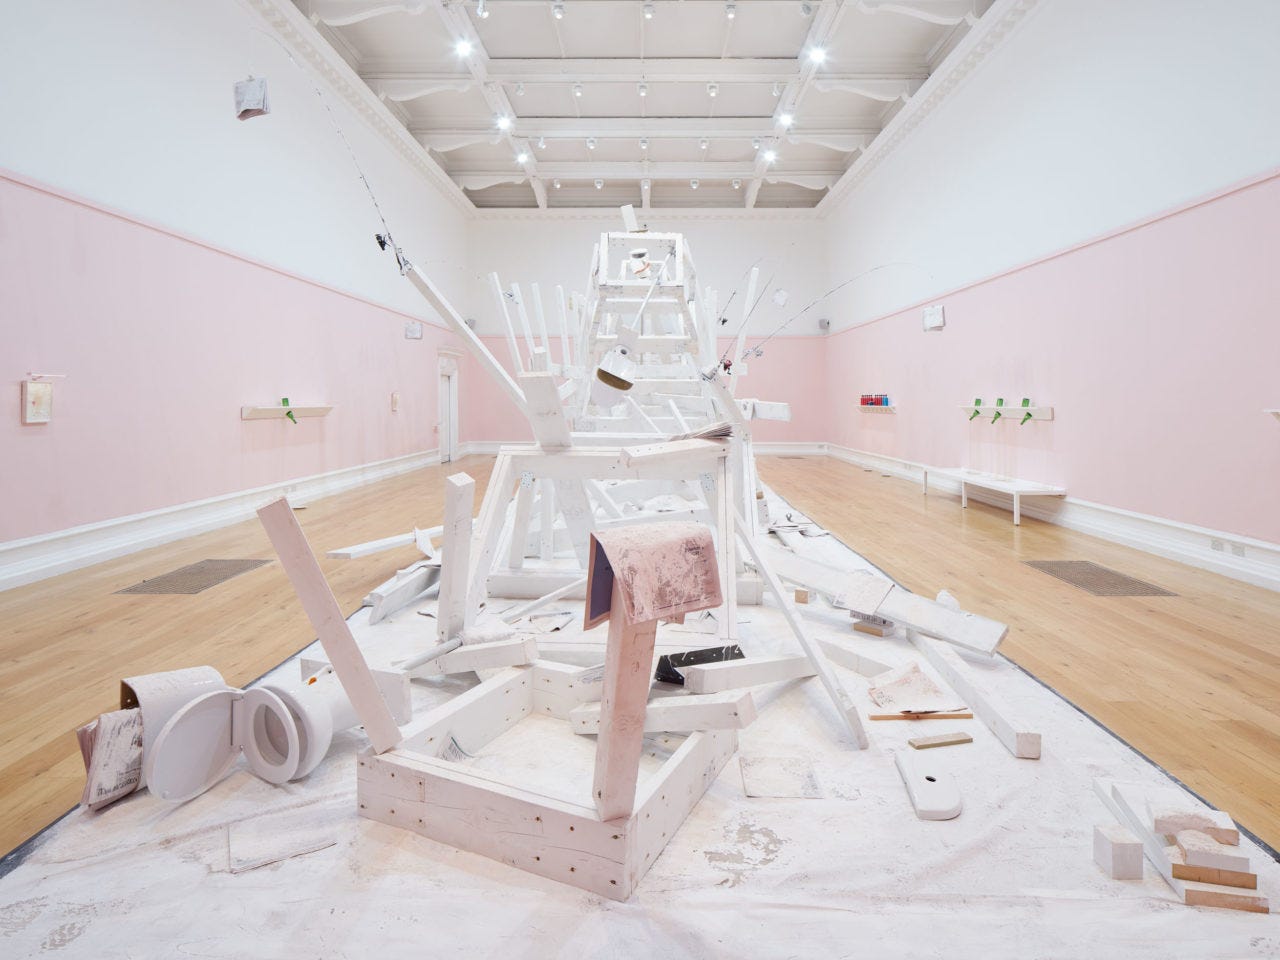 A wooden installation by artist Pope.L painted white and covered in flour in the centre of a large gallery with pink and white walls.